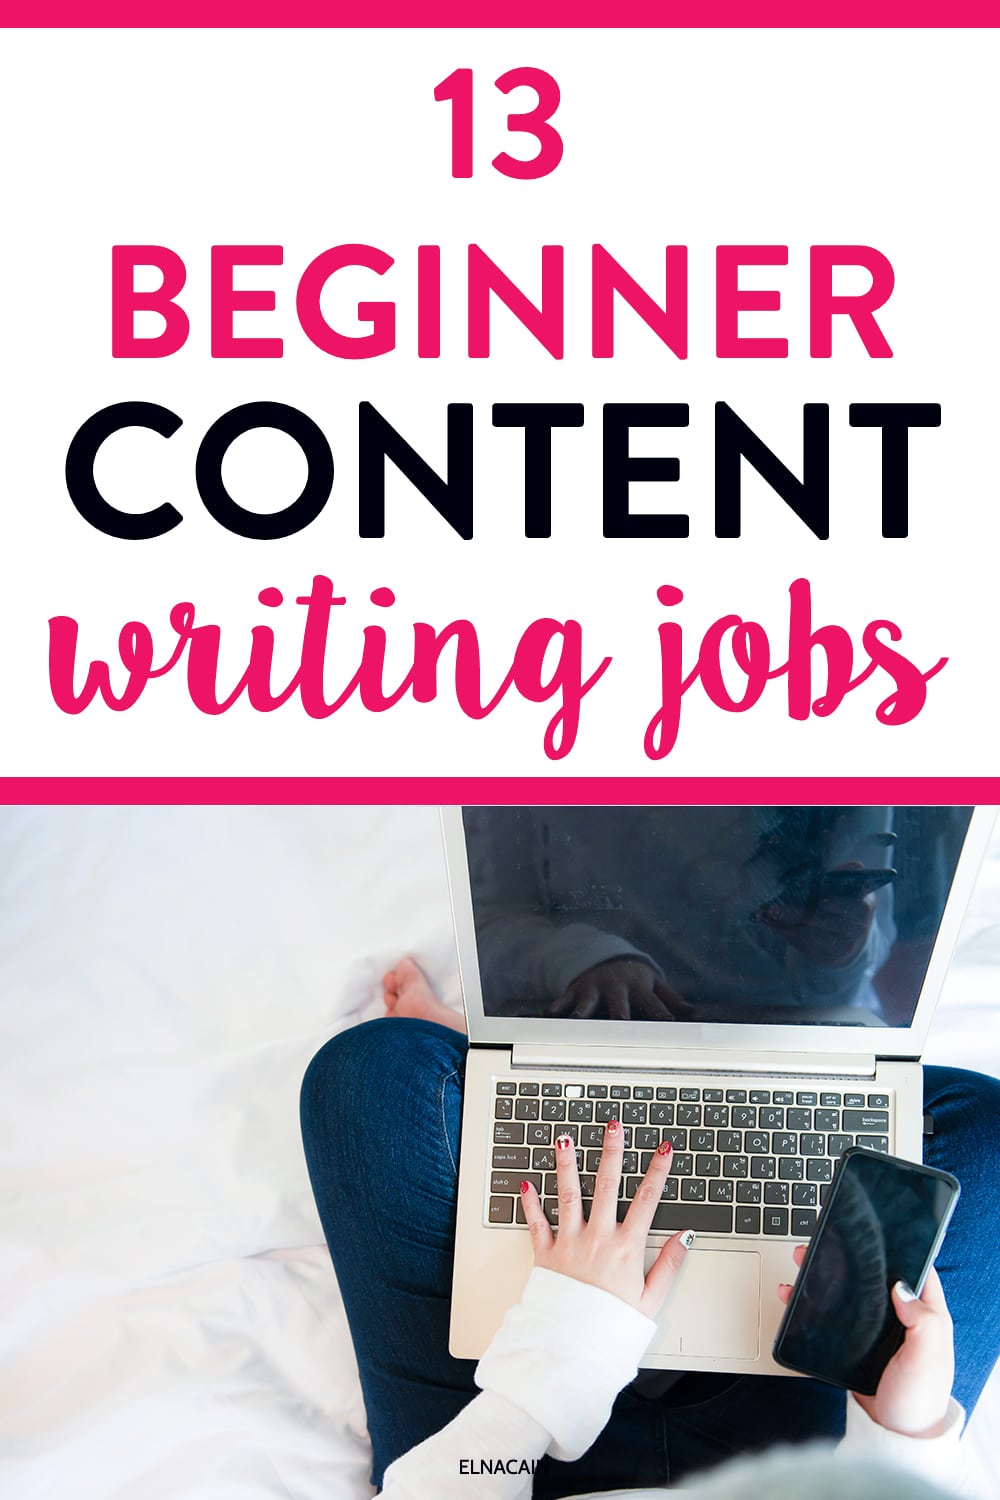 Content Writing Jobs For Beginners